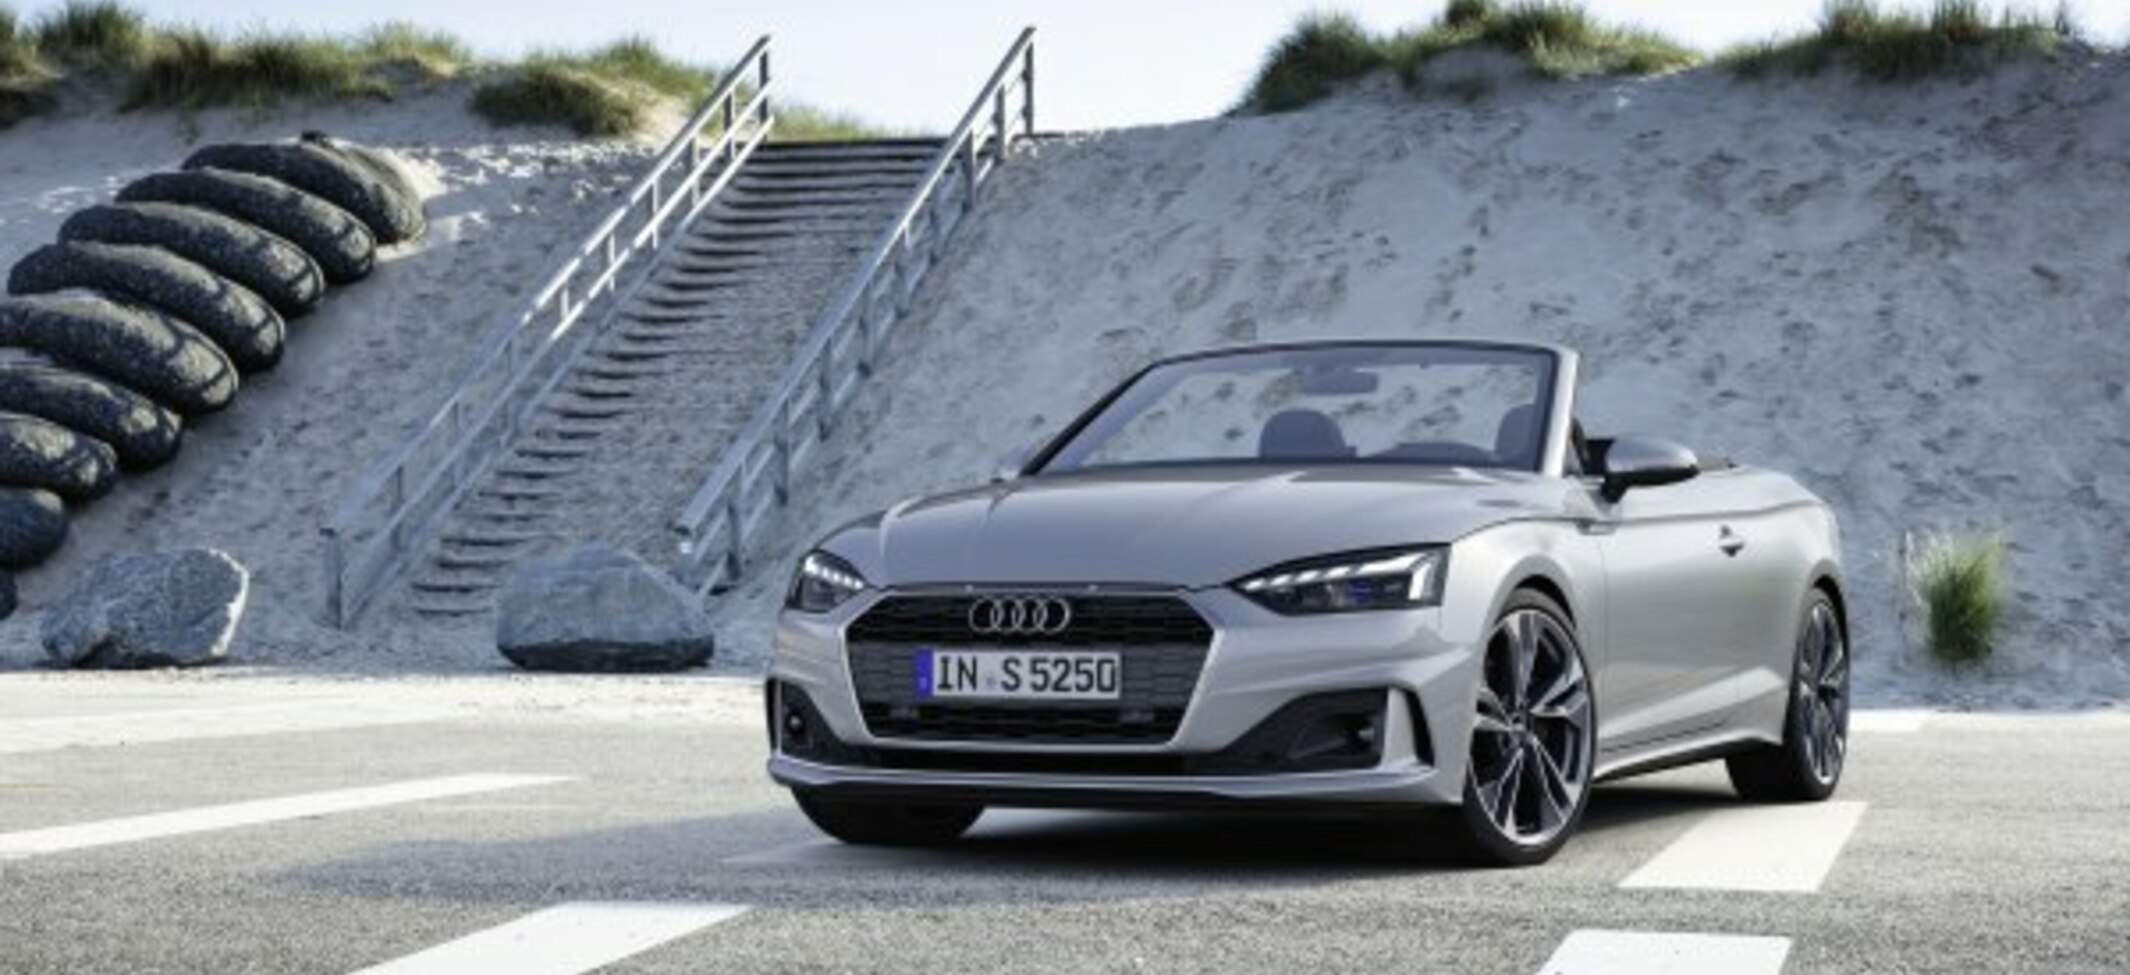 Audi A5 Cabriolet (F5, facelift 2019) 45 TFSI (265 Hp) MHEV quattro S tronic 2020, 2021 